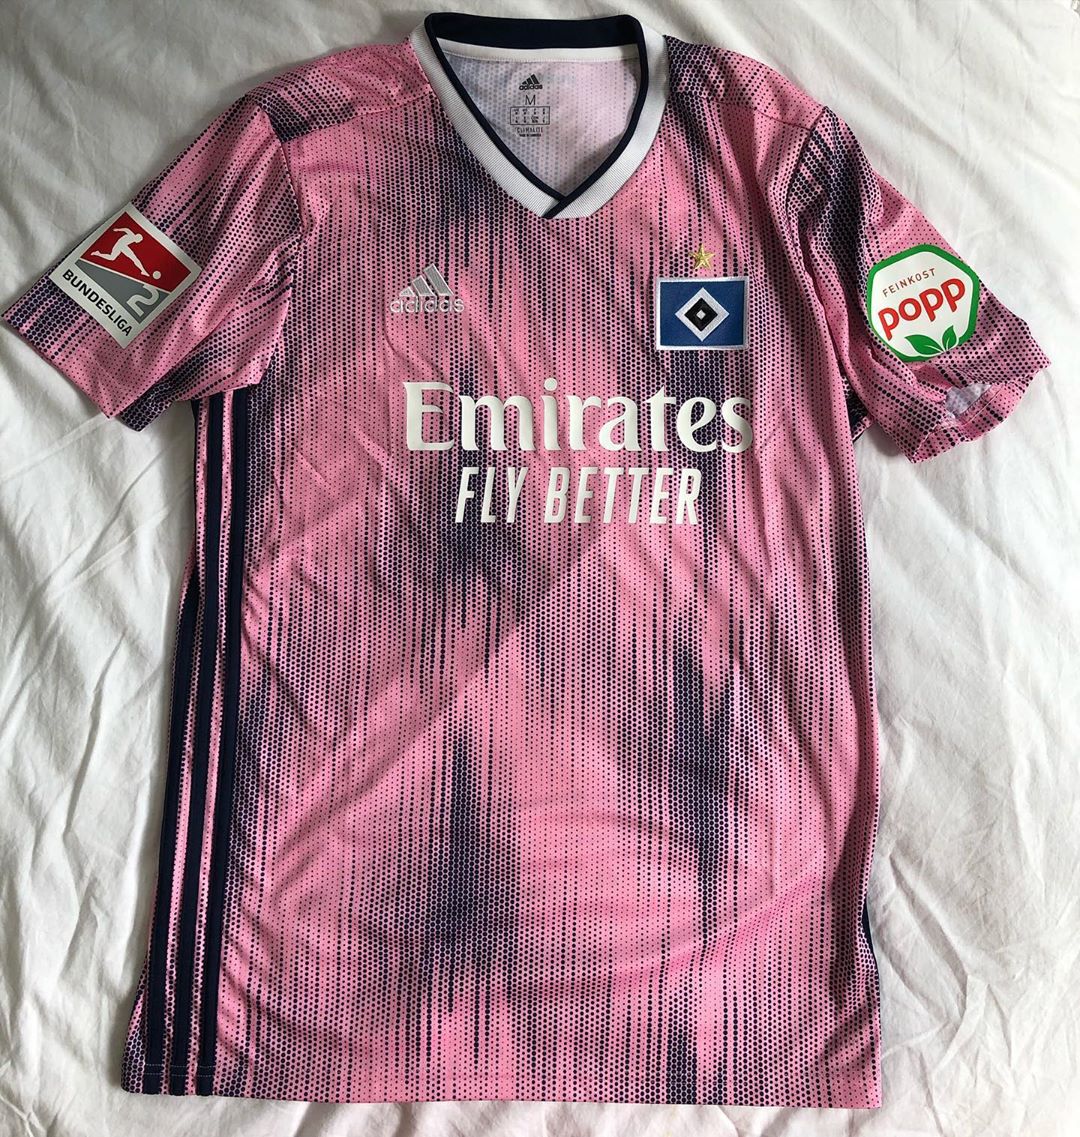 Hamburger SV Home 2019/2020 Football Shirt Manufactured By Adidas. The club plays football in Germany.